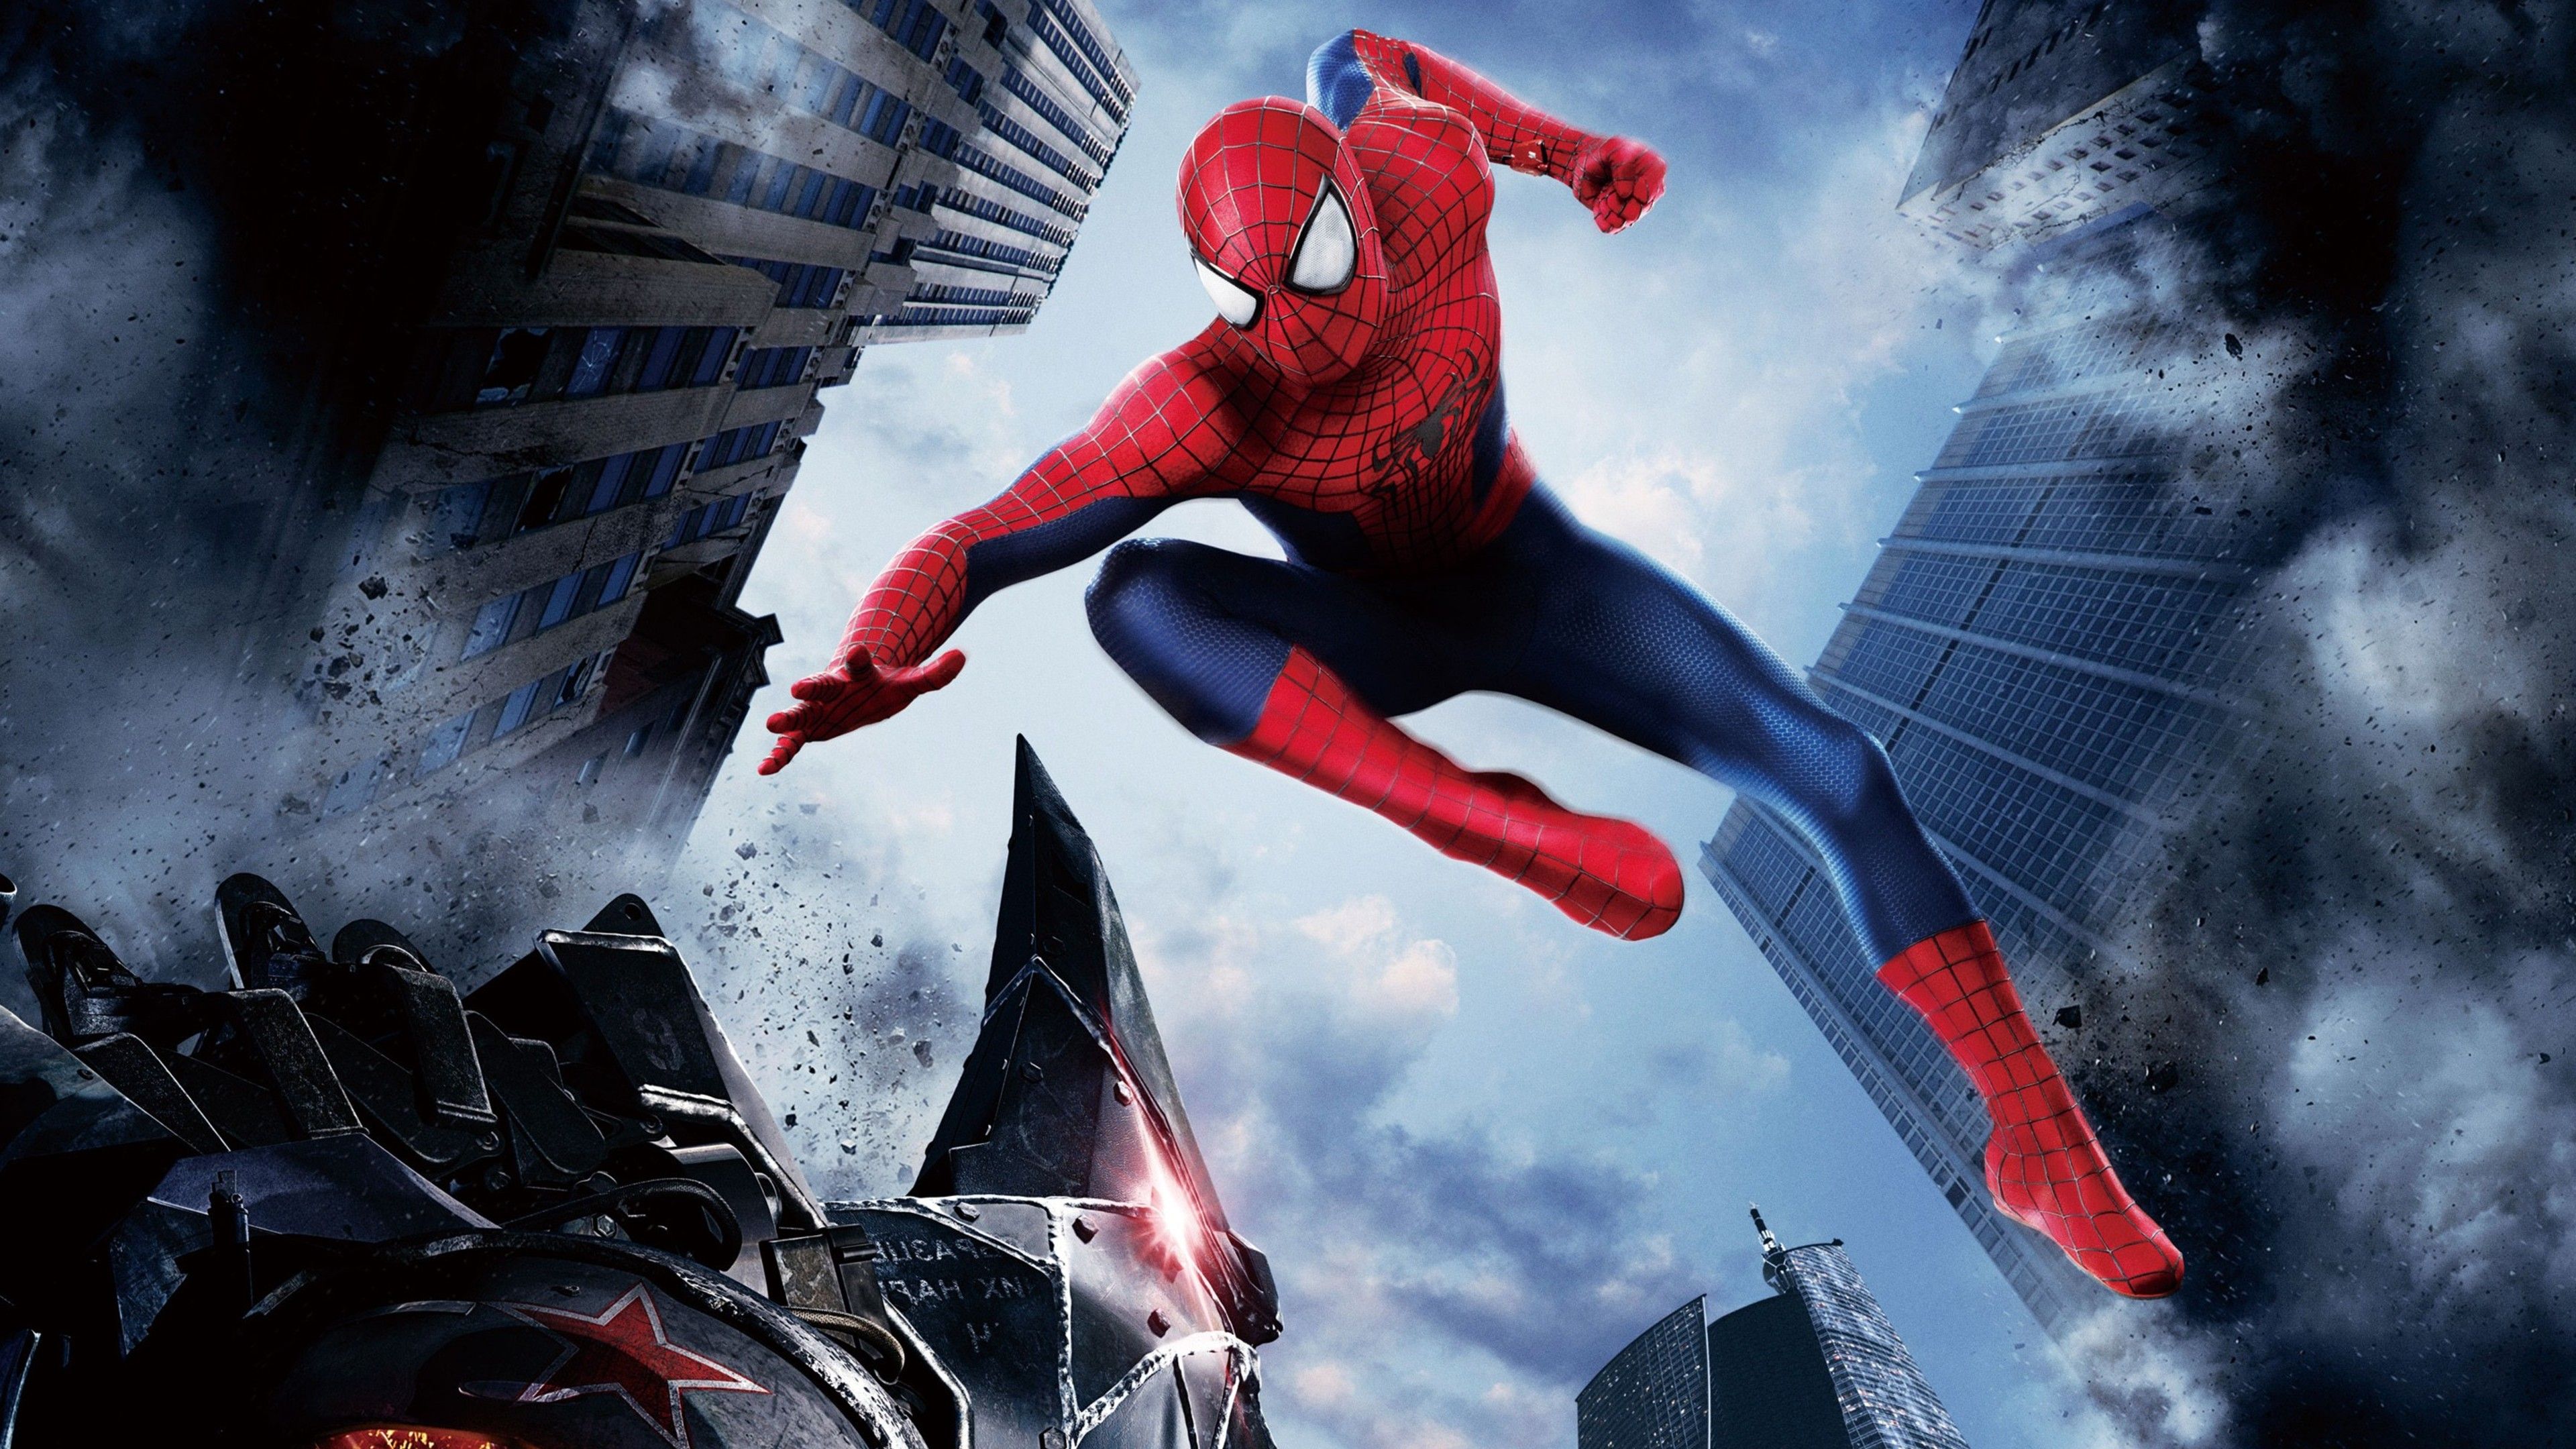 the amazing spider man wallpaper hd for windows 7